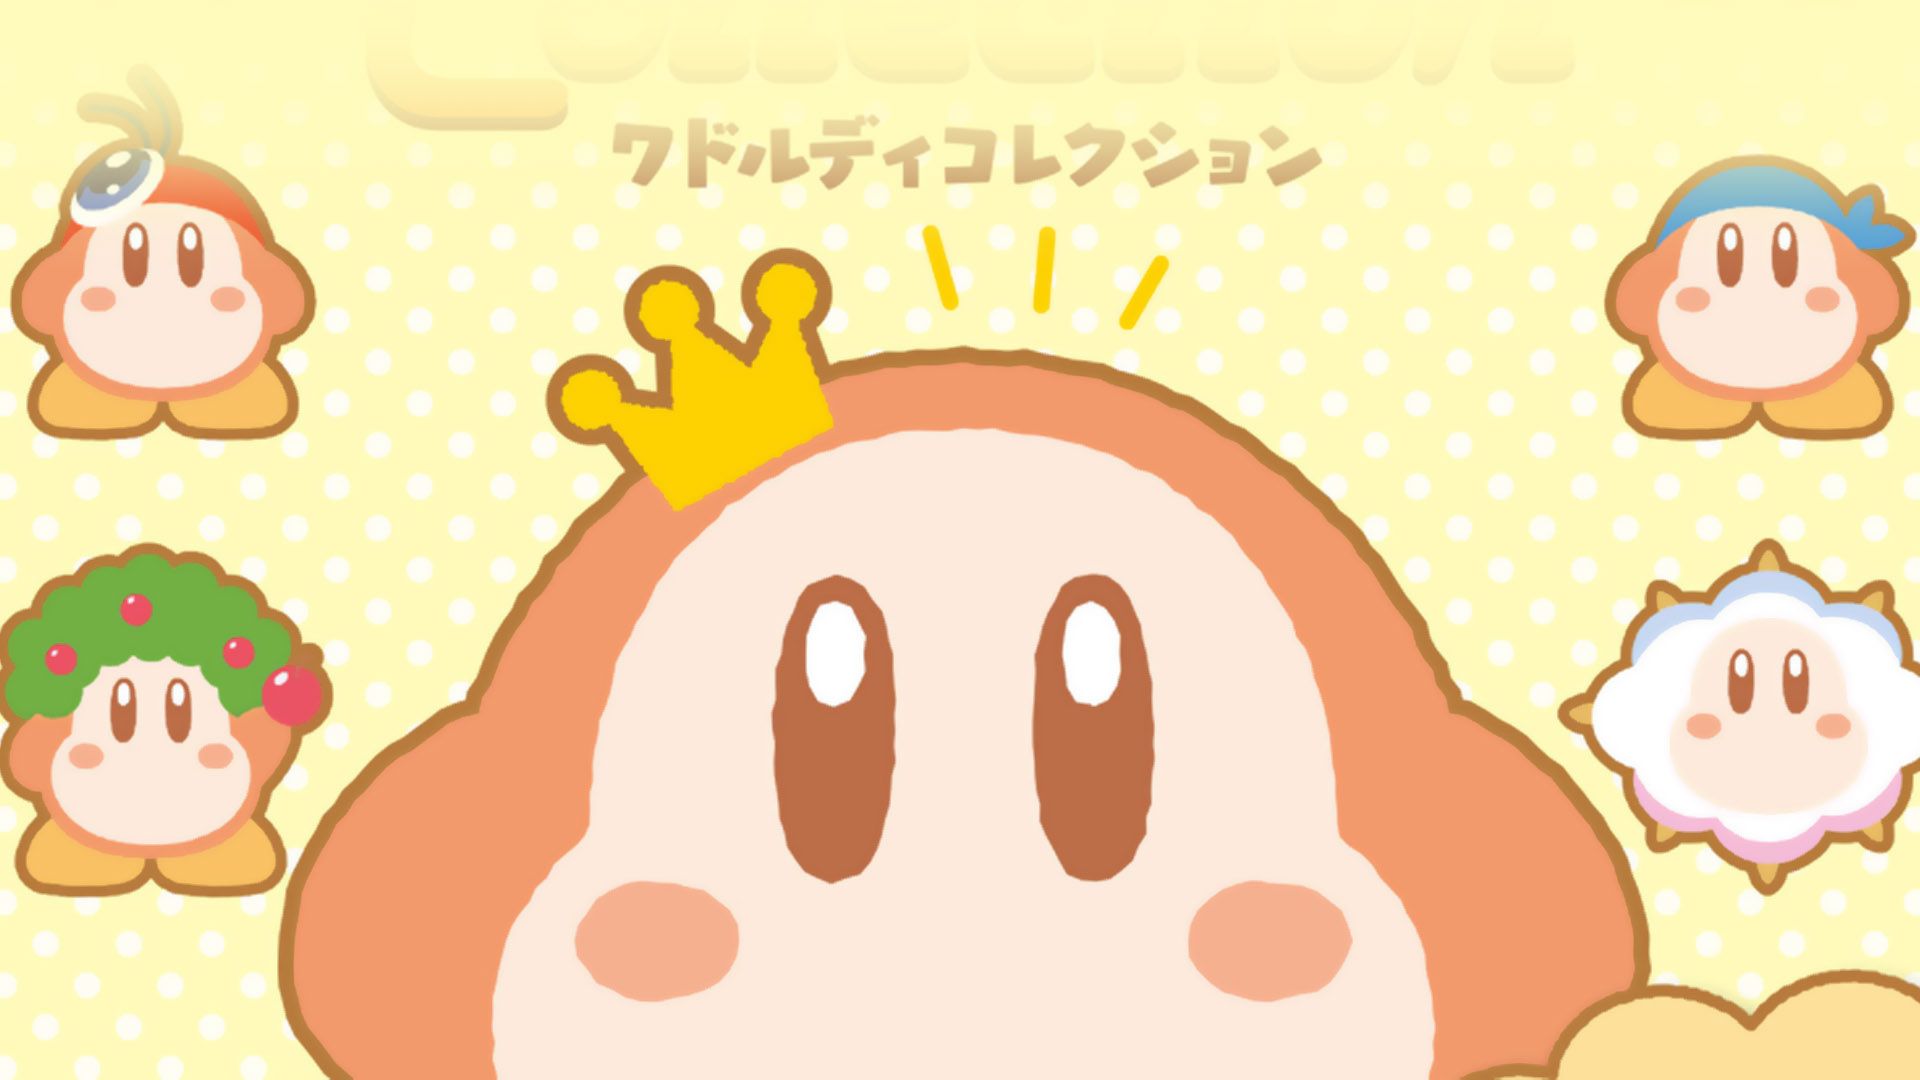 Waddle Dee getting a whole collection of costumed goods